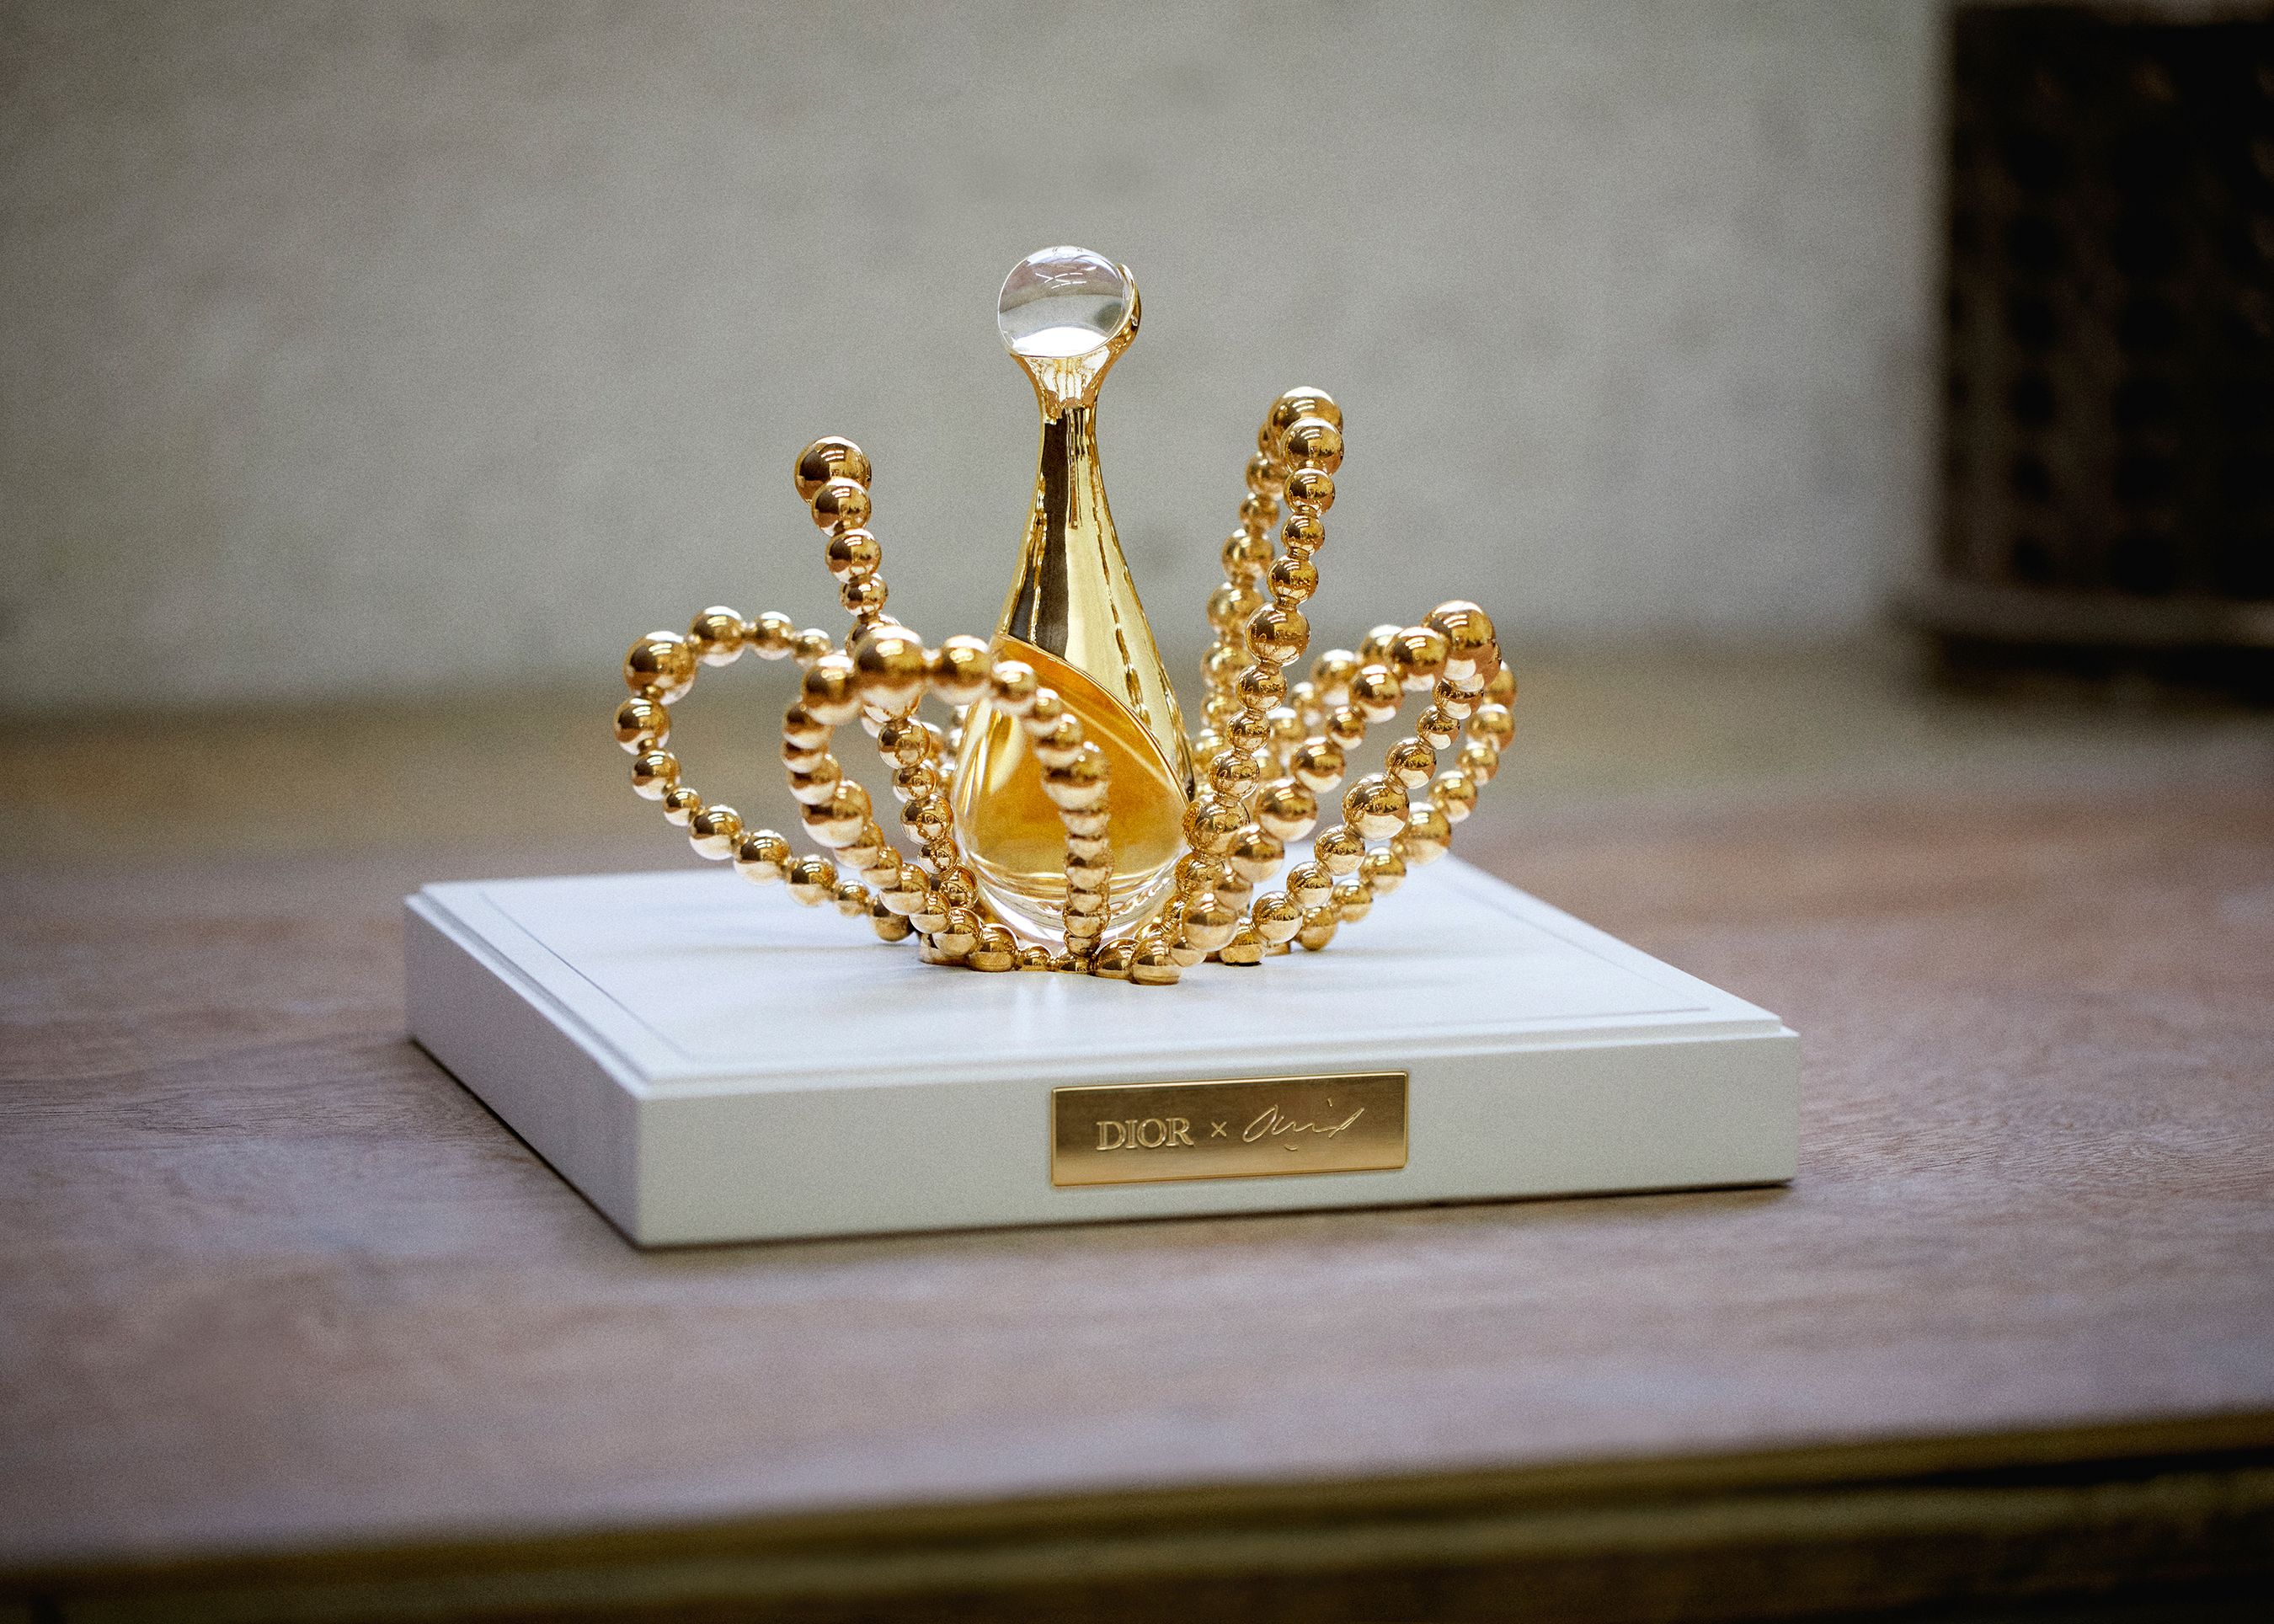 Dior unveils J'adore l'Or, the new Dior fragrance by Francis Kurkdjian